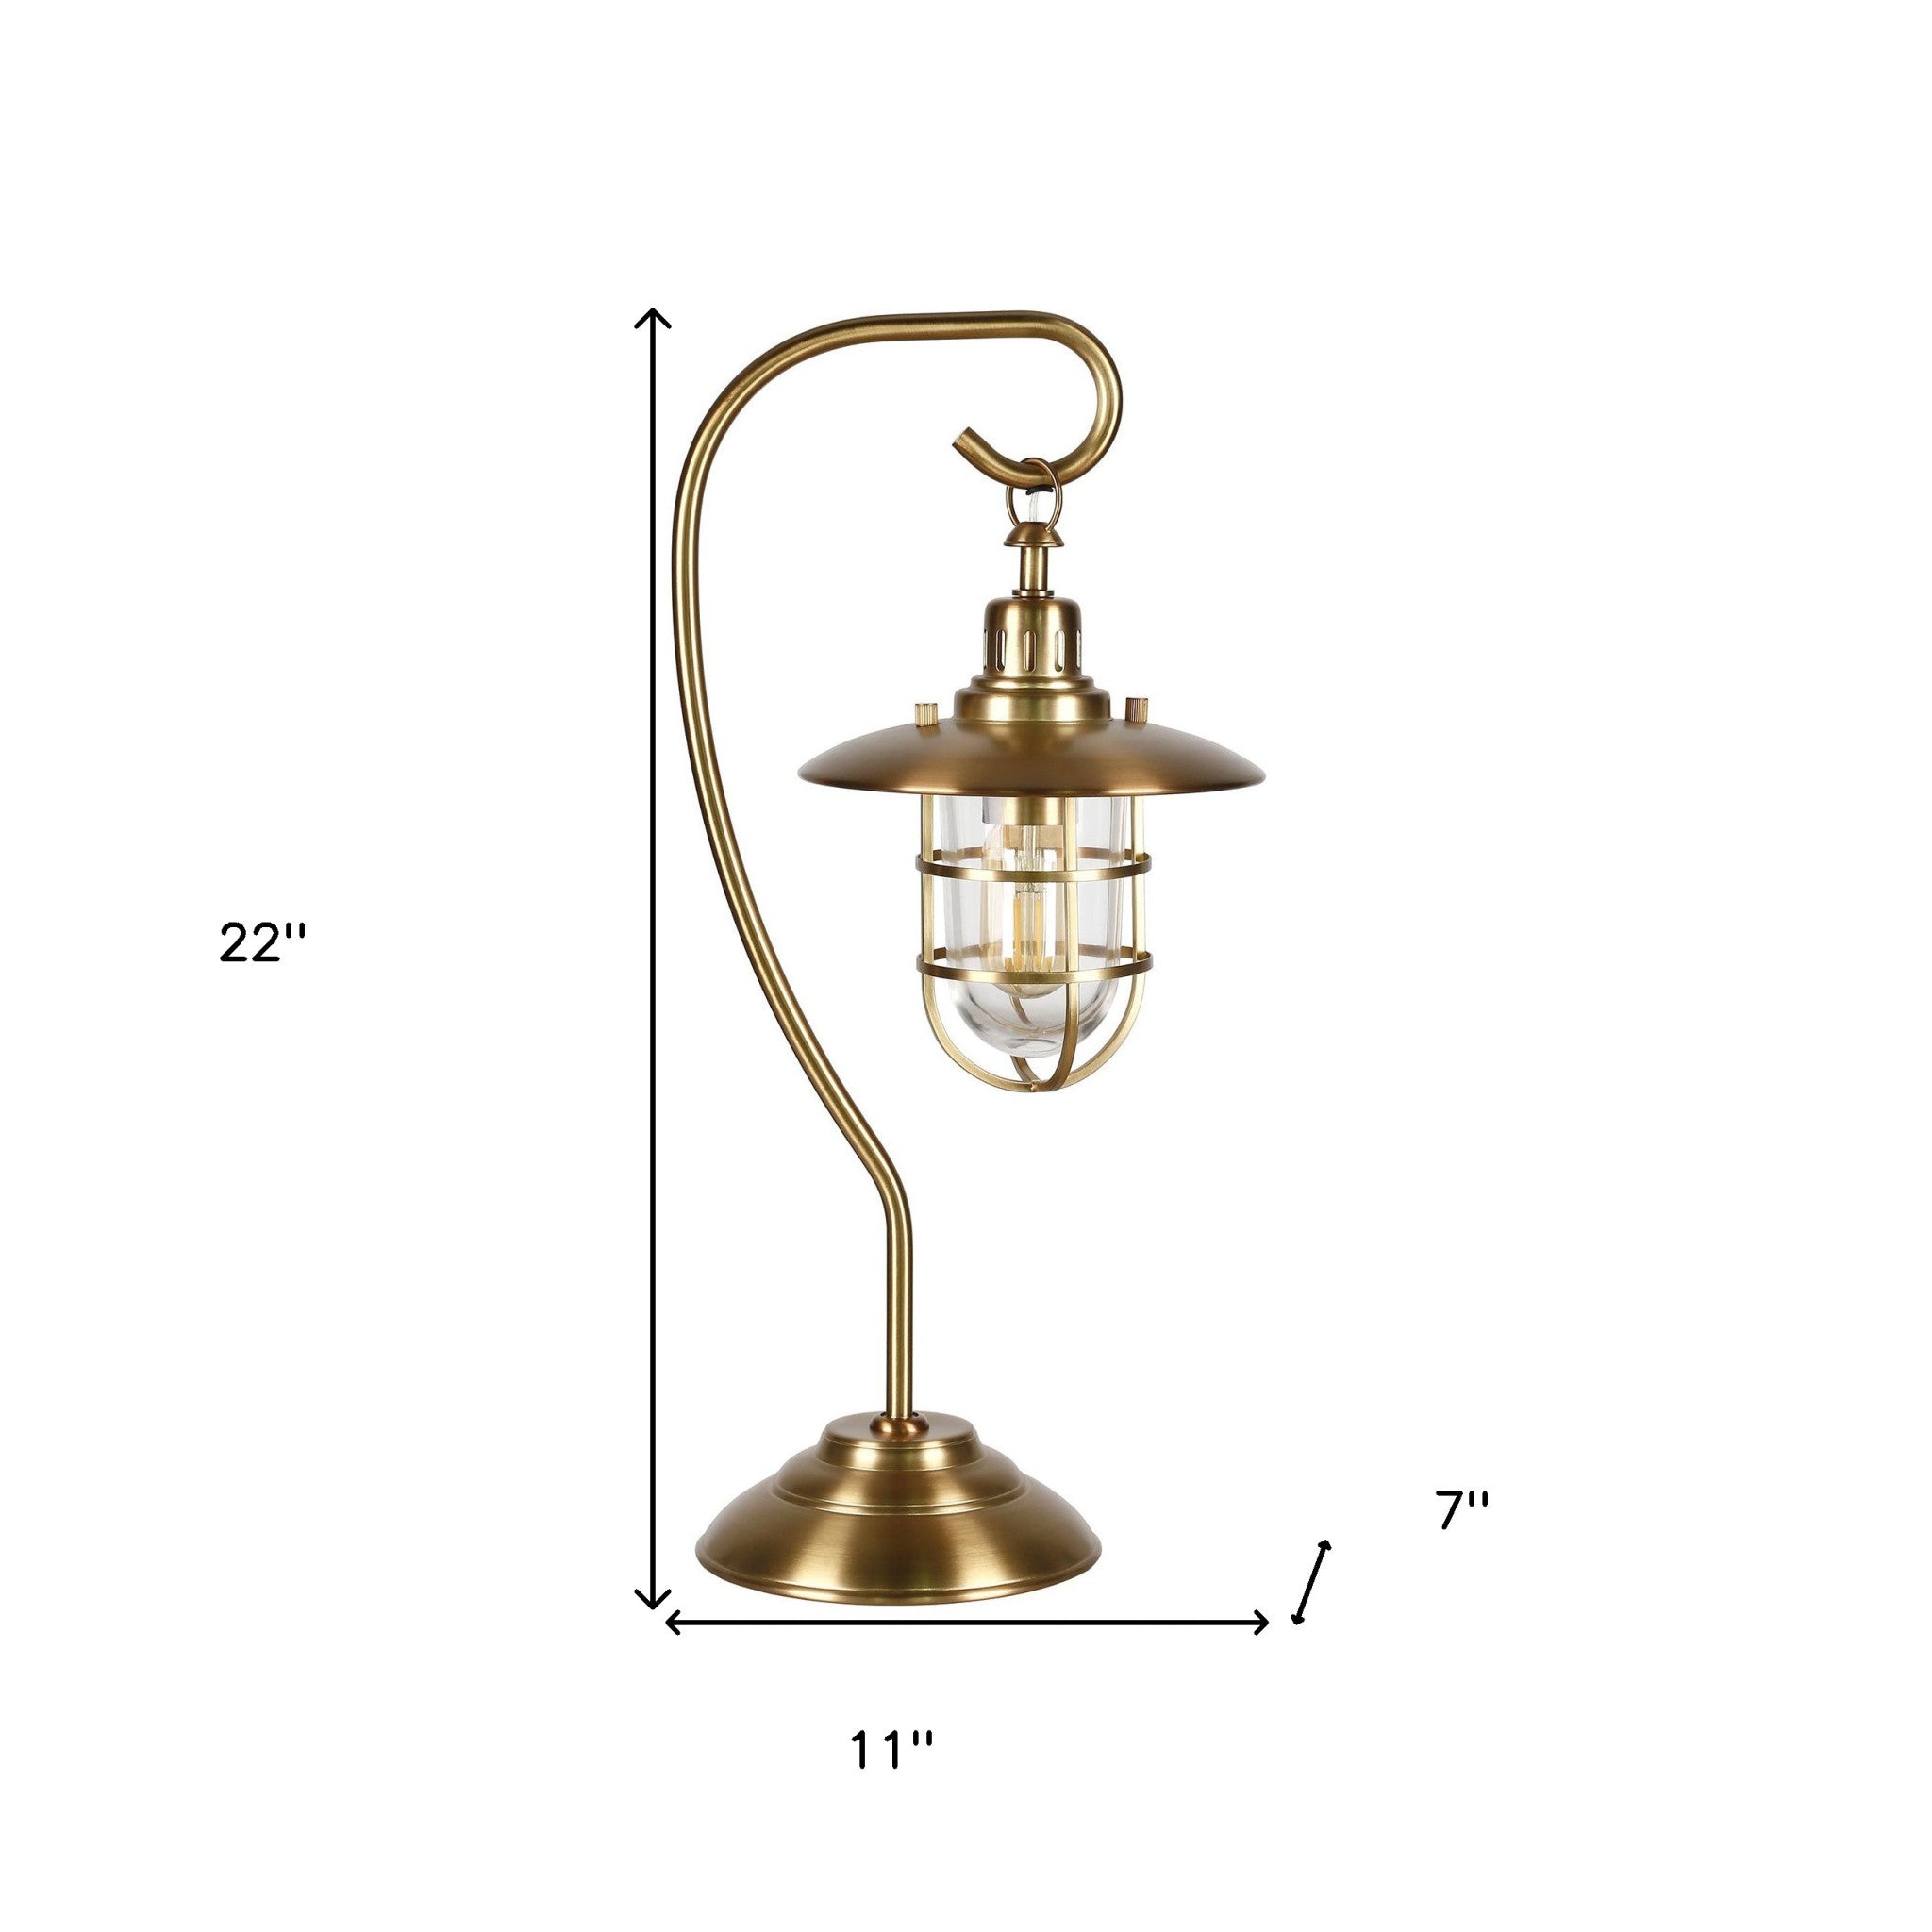 22" Antiqued Brass Metal Arched Table Lamp With Brass Cage Shade